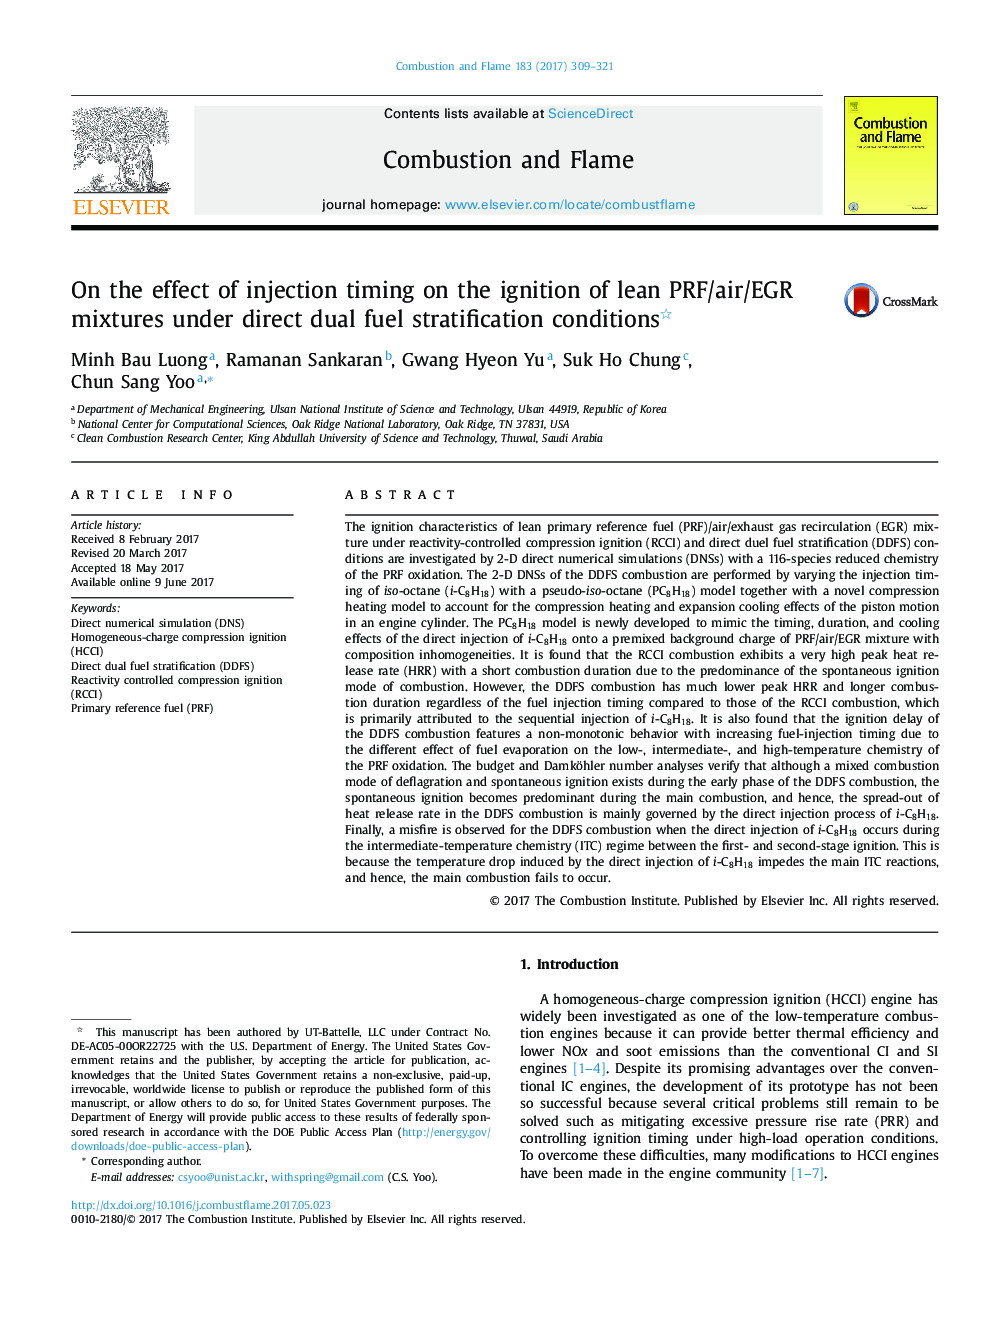 On the effect of injection timing on the ignition of lean PRF/air/EGR mixtures under direct dual fuel stratification conditions